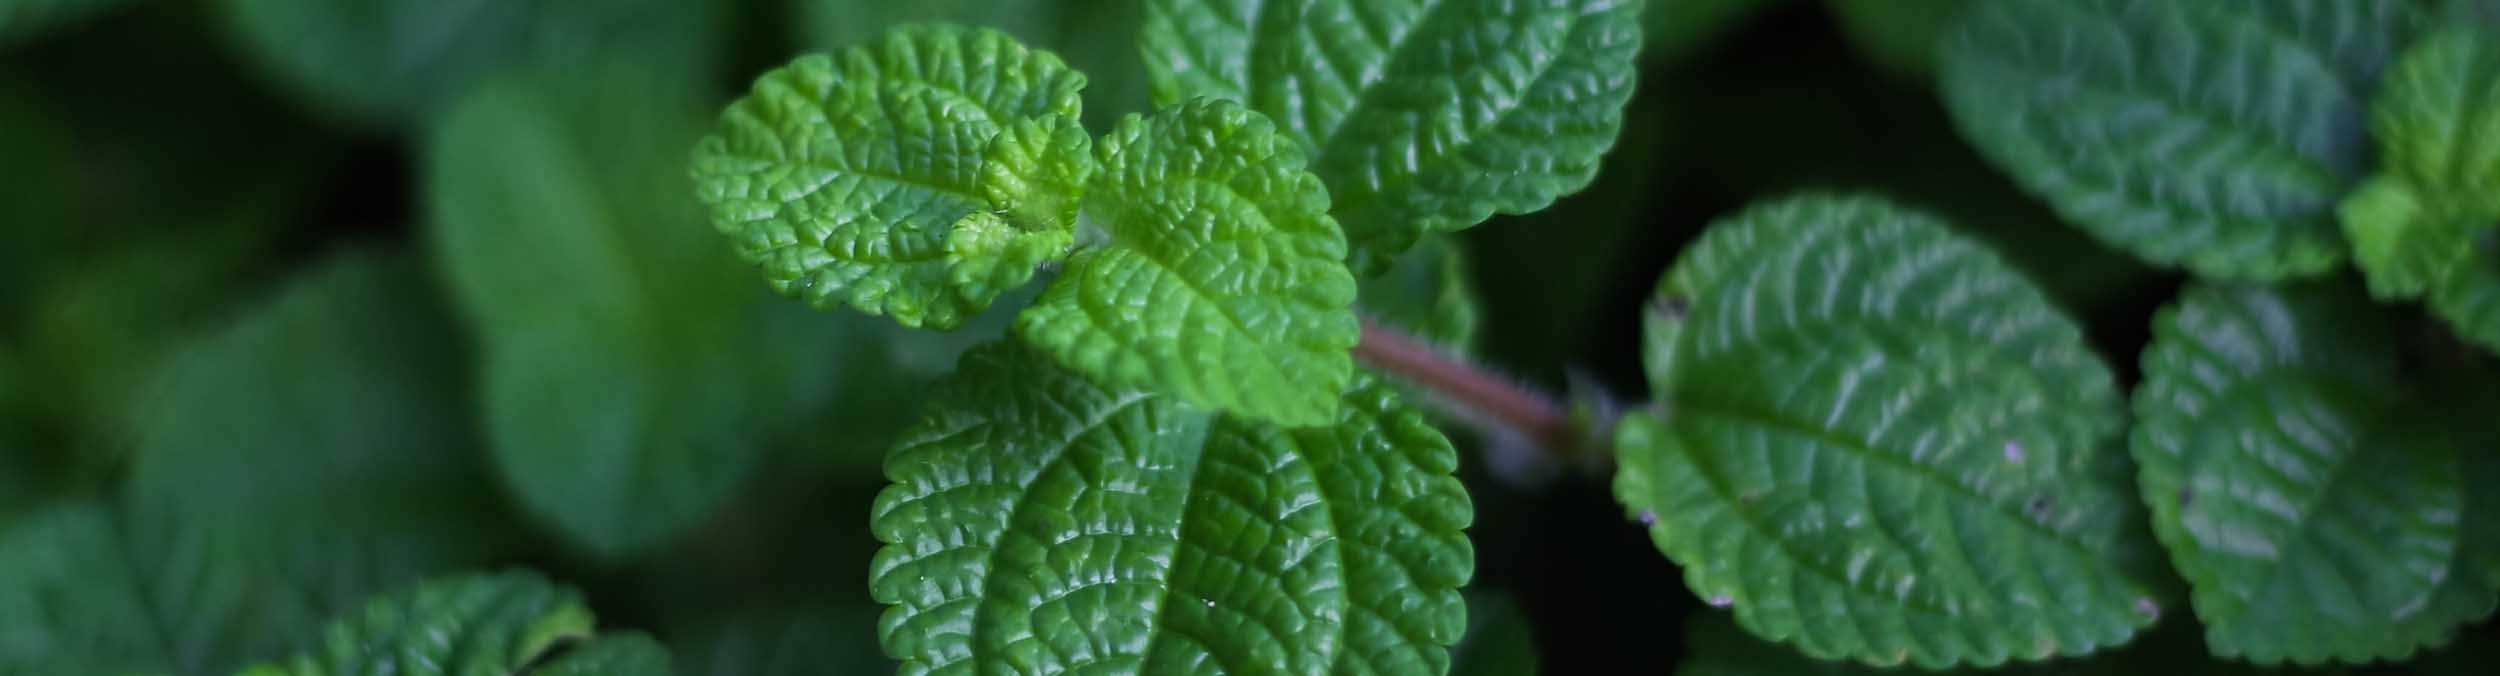 Patch of mint leaves
